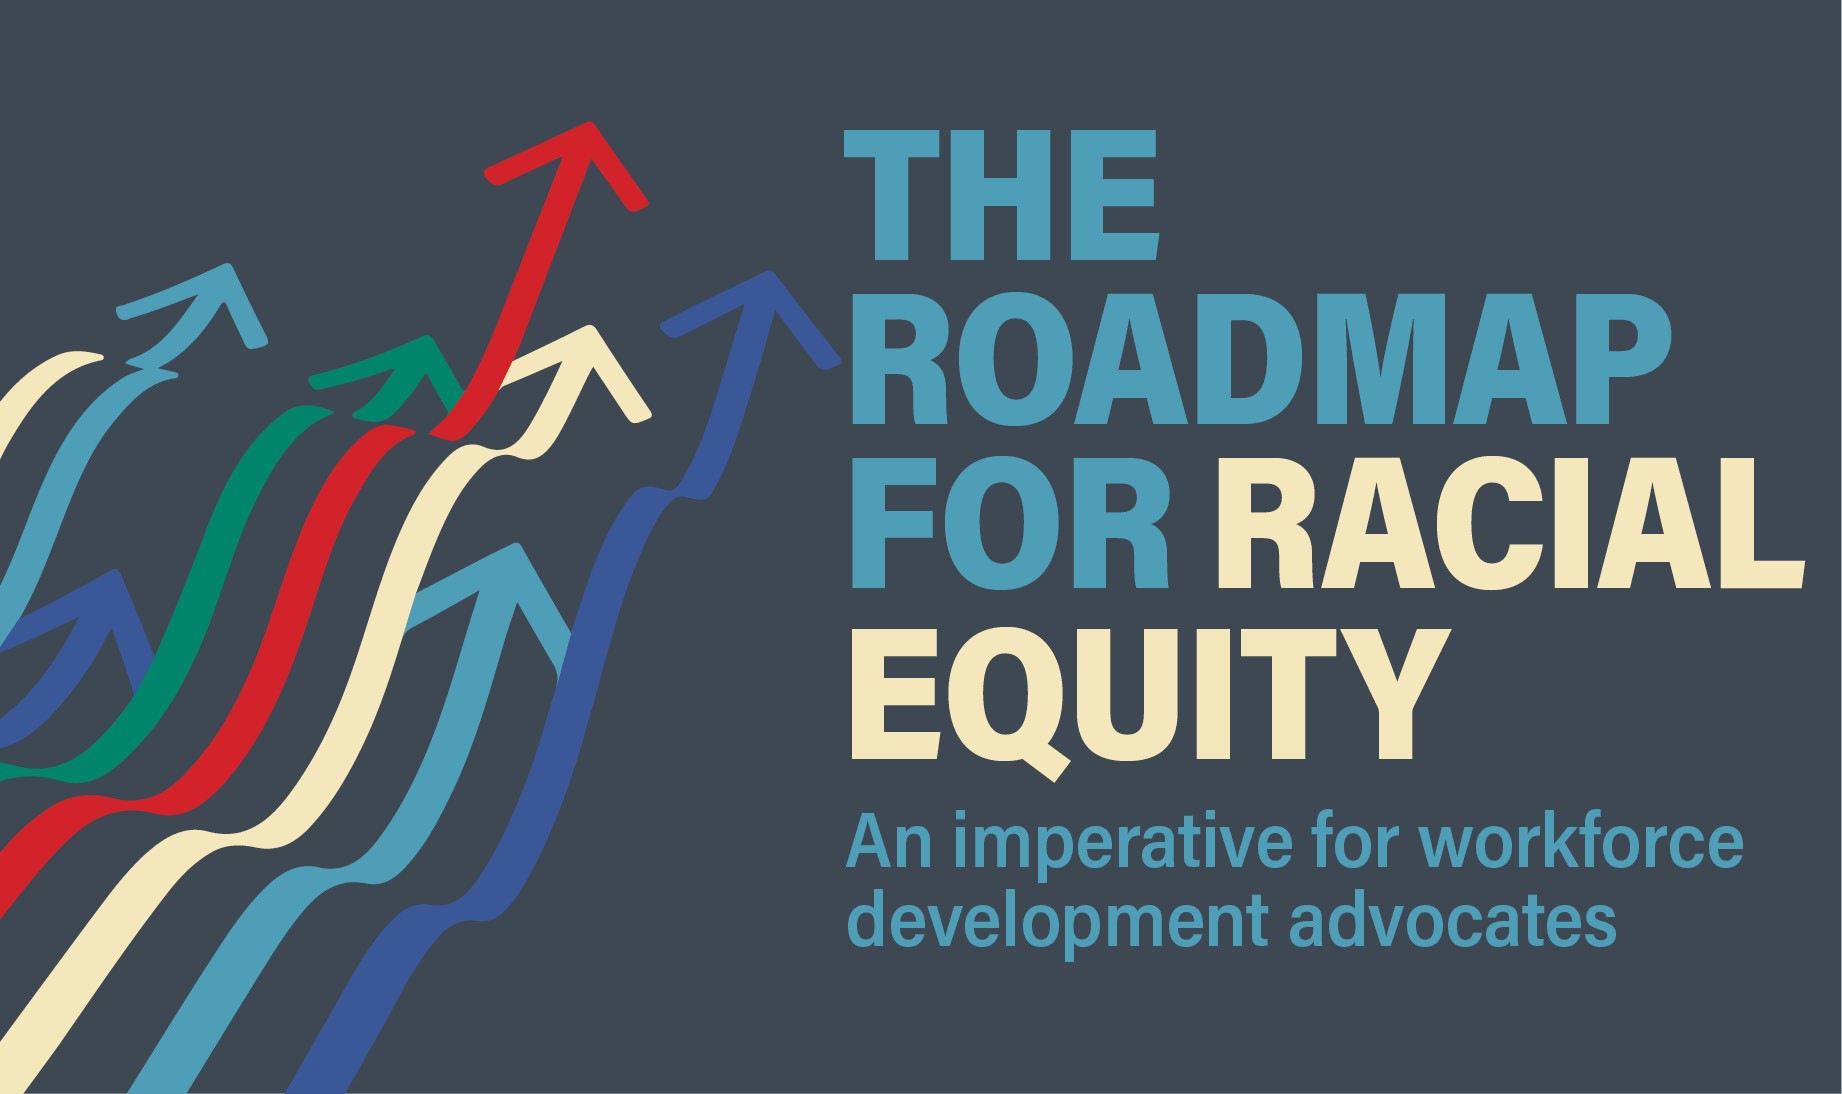 NSC’s new report explores the imperative of racial equity in workforce development